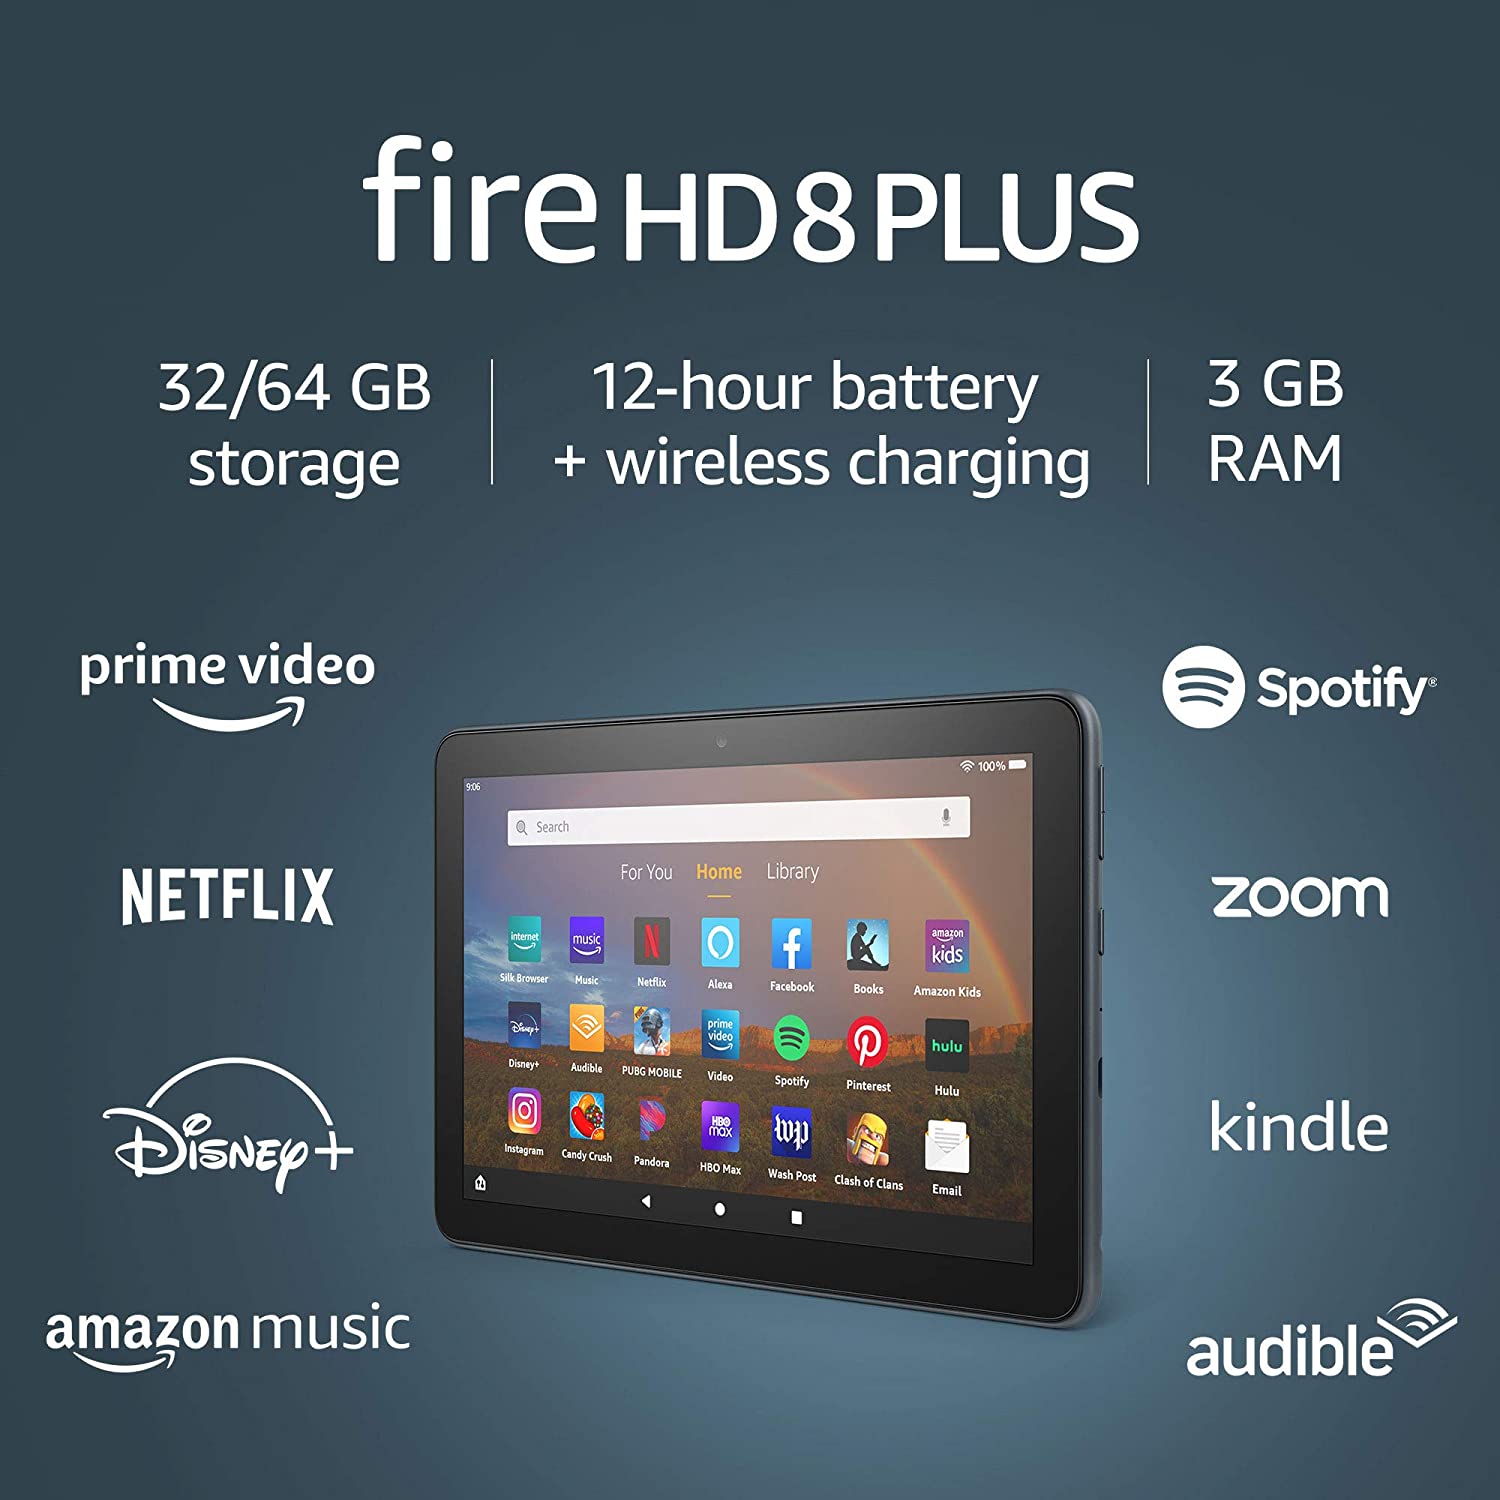 Amazon Fire HD 8 Plus 2020 features